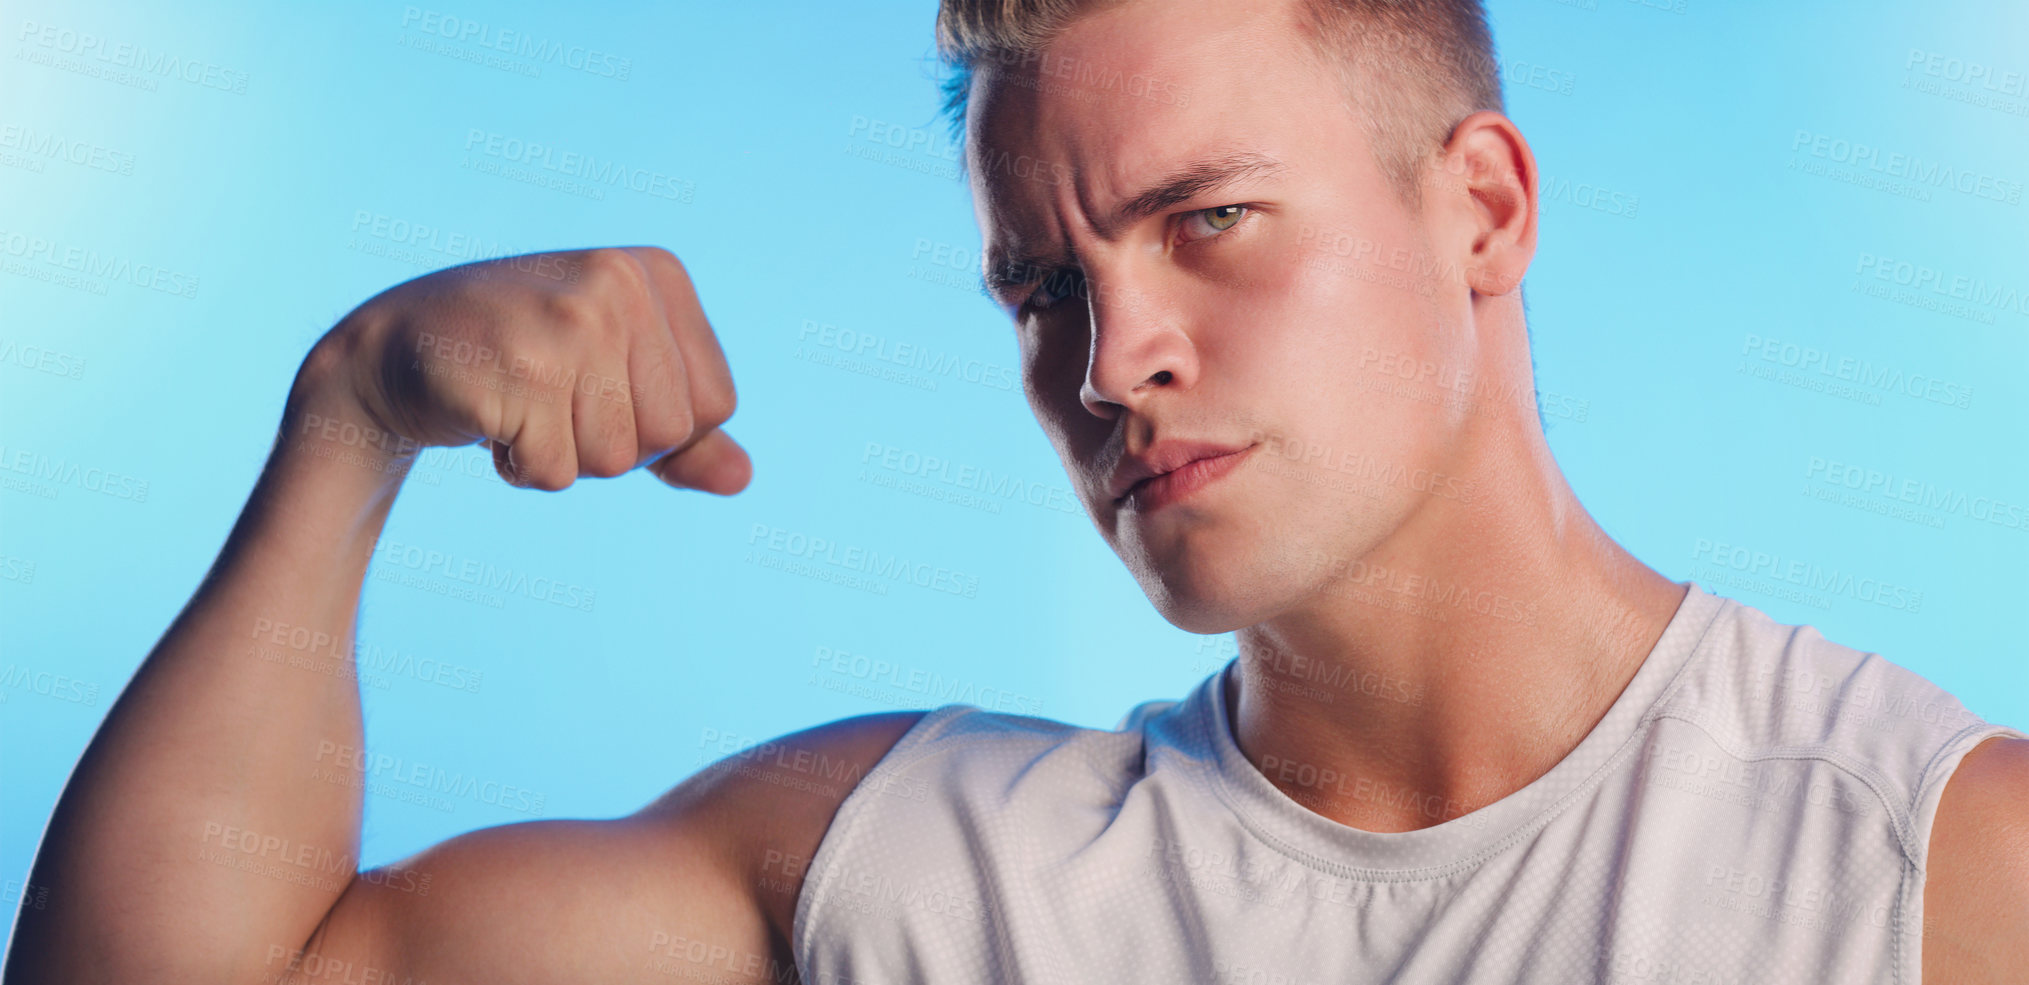 Buy stock photo Studio portrait of a handsome young man flexing his bicep against a blue background